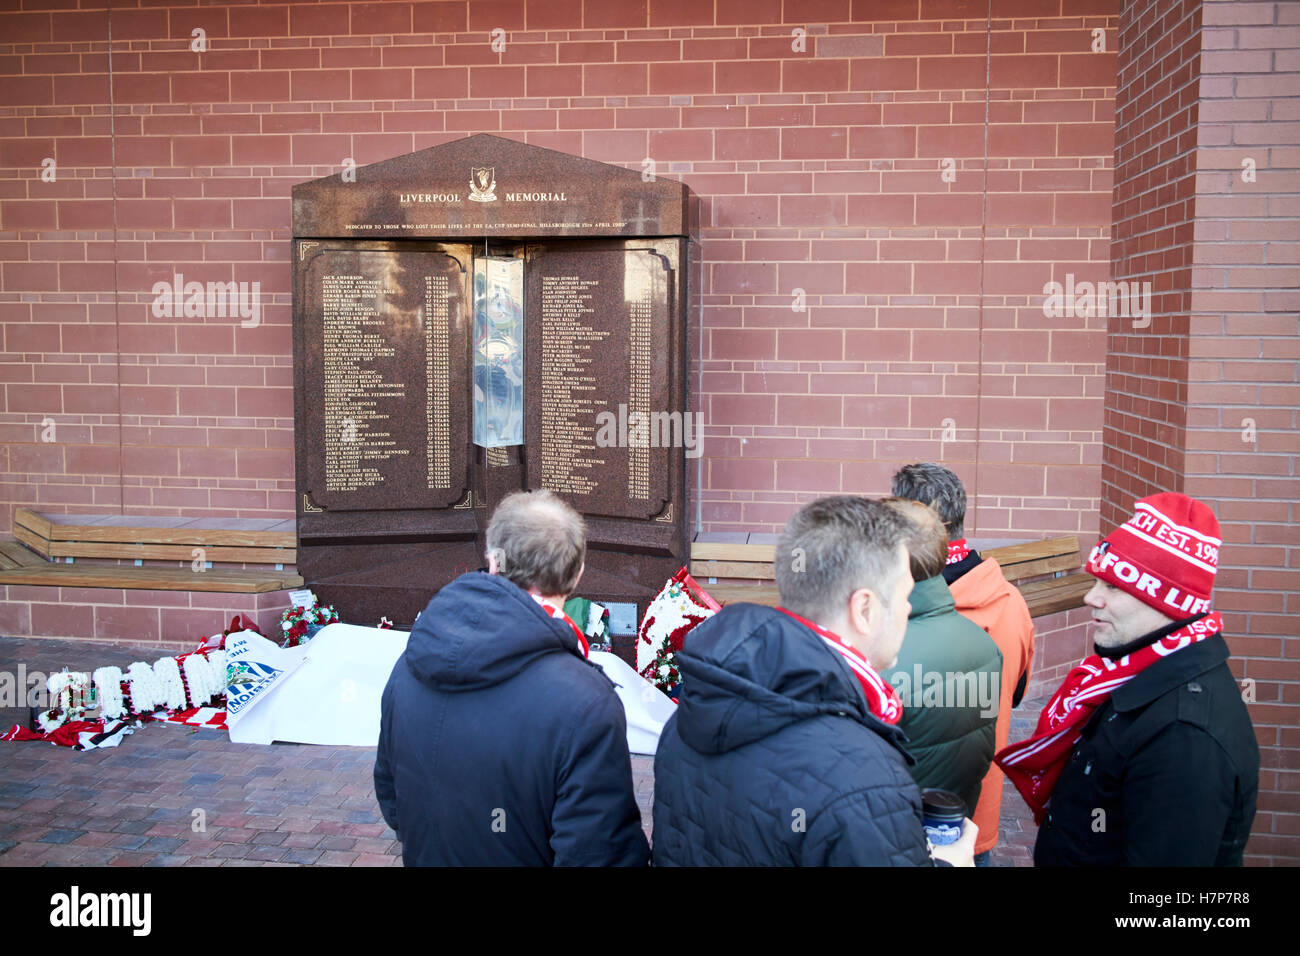 fans pay respects at hillsborough memorial anfield liverpool fc uk Stock Photo